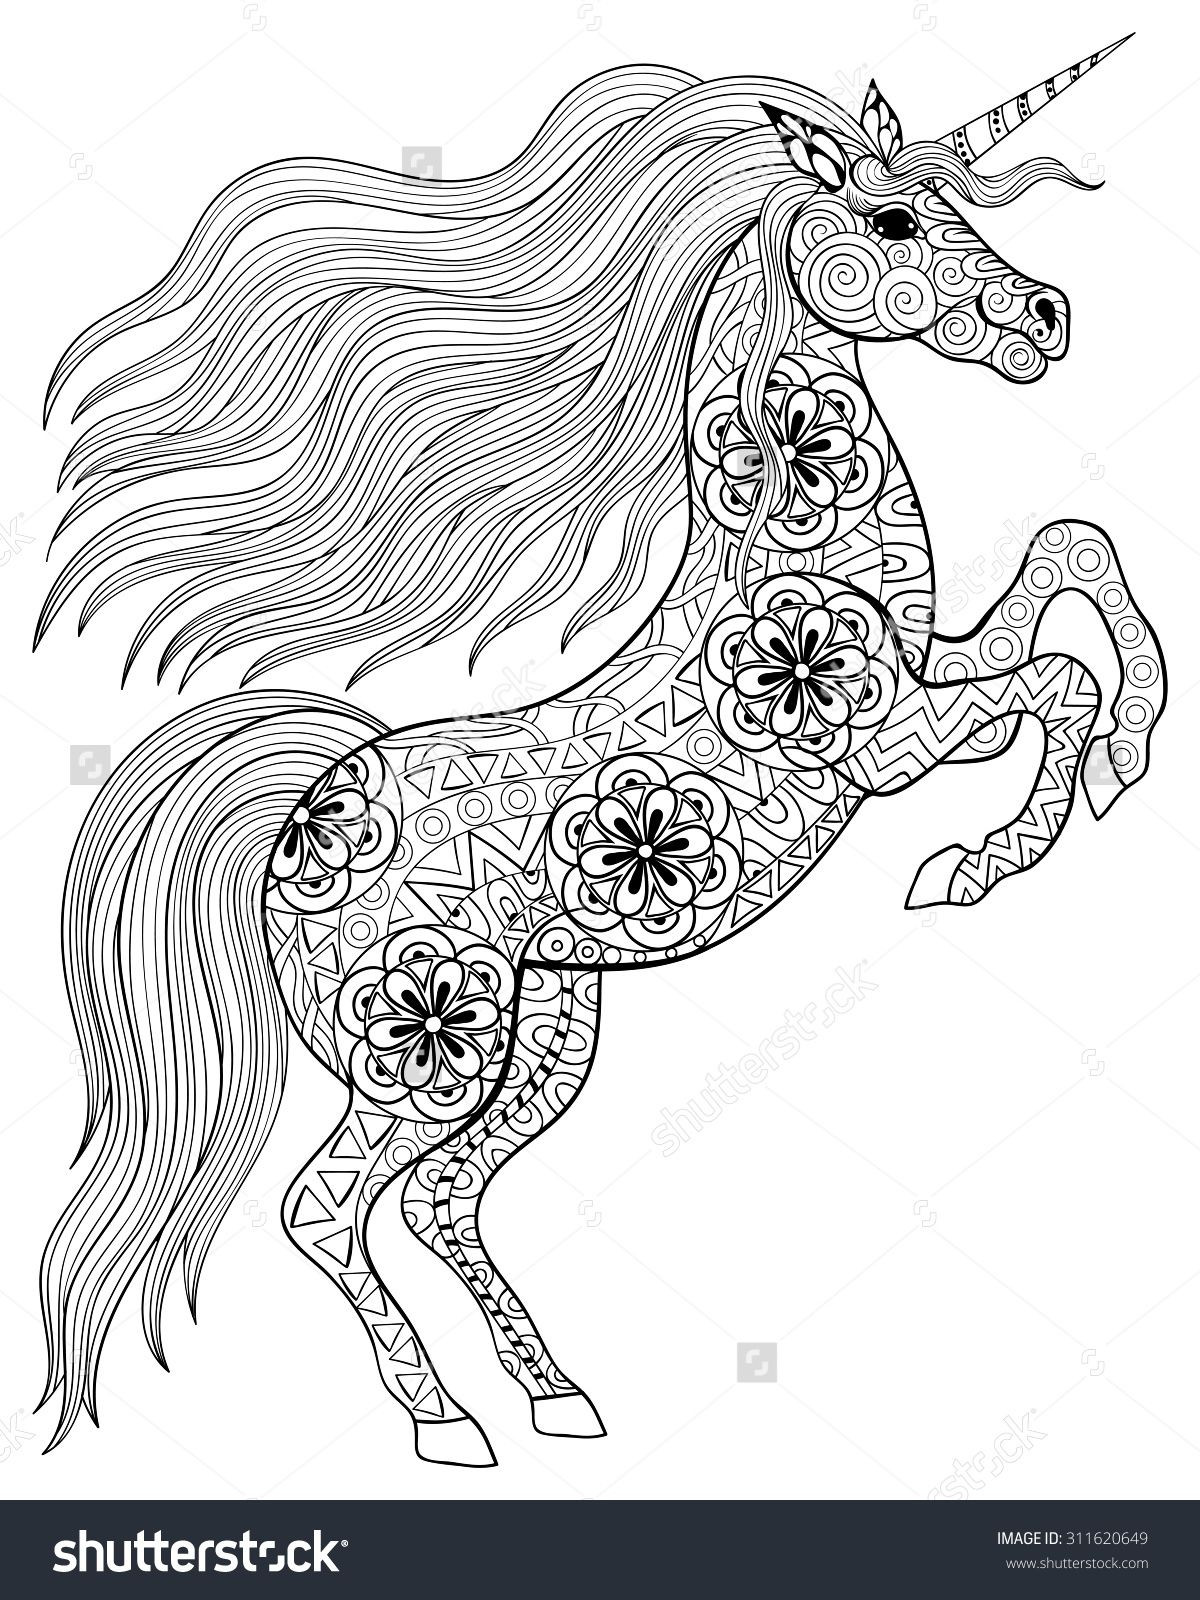 Adult Coloring Pages Unicorn
 Pin by Ulrica Flodin on 1A d z Animals